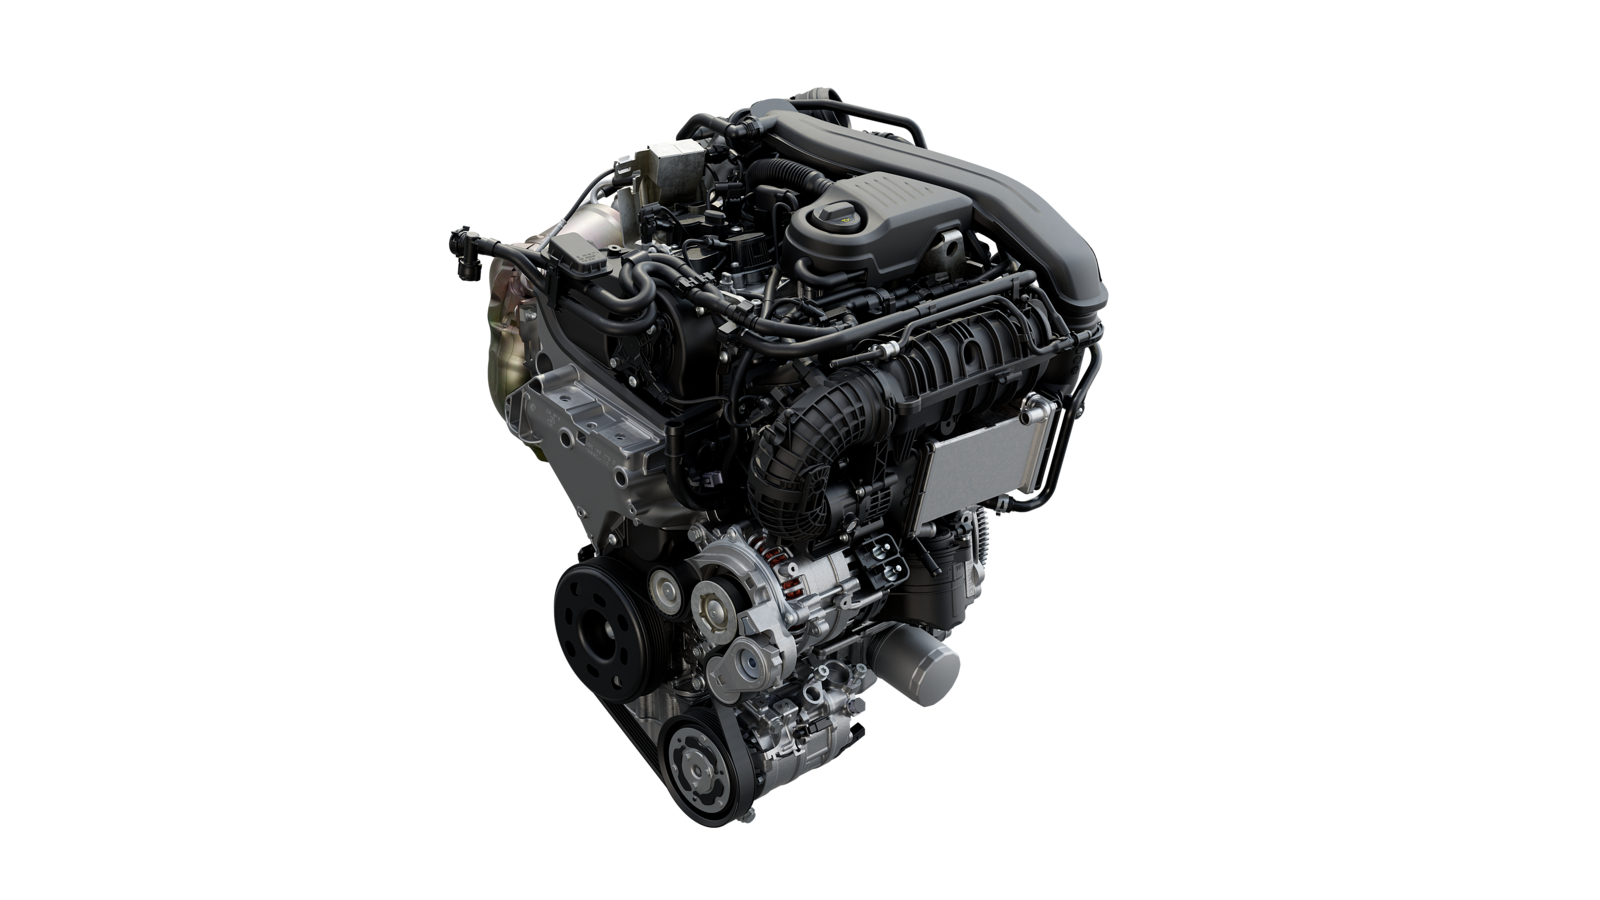 1.5 TSI evo2 – basic engine for many Volkswagen models  (at present only for T-Roc and T-Roc Cabriolet)